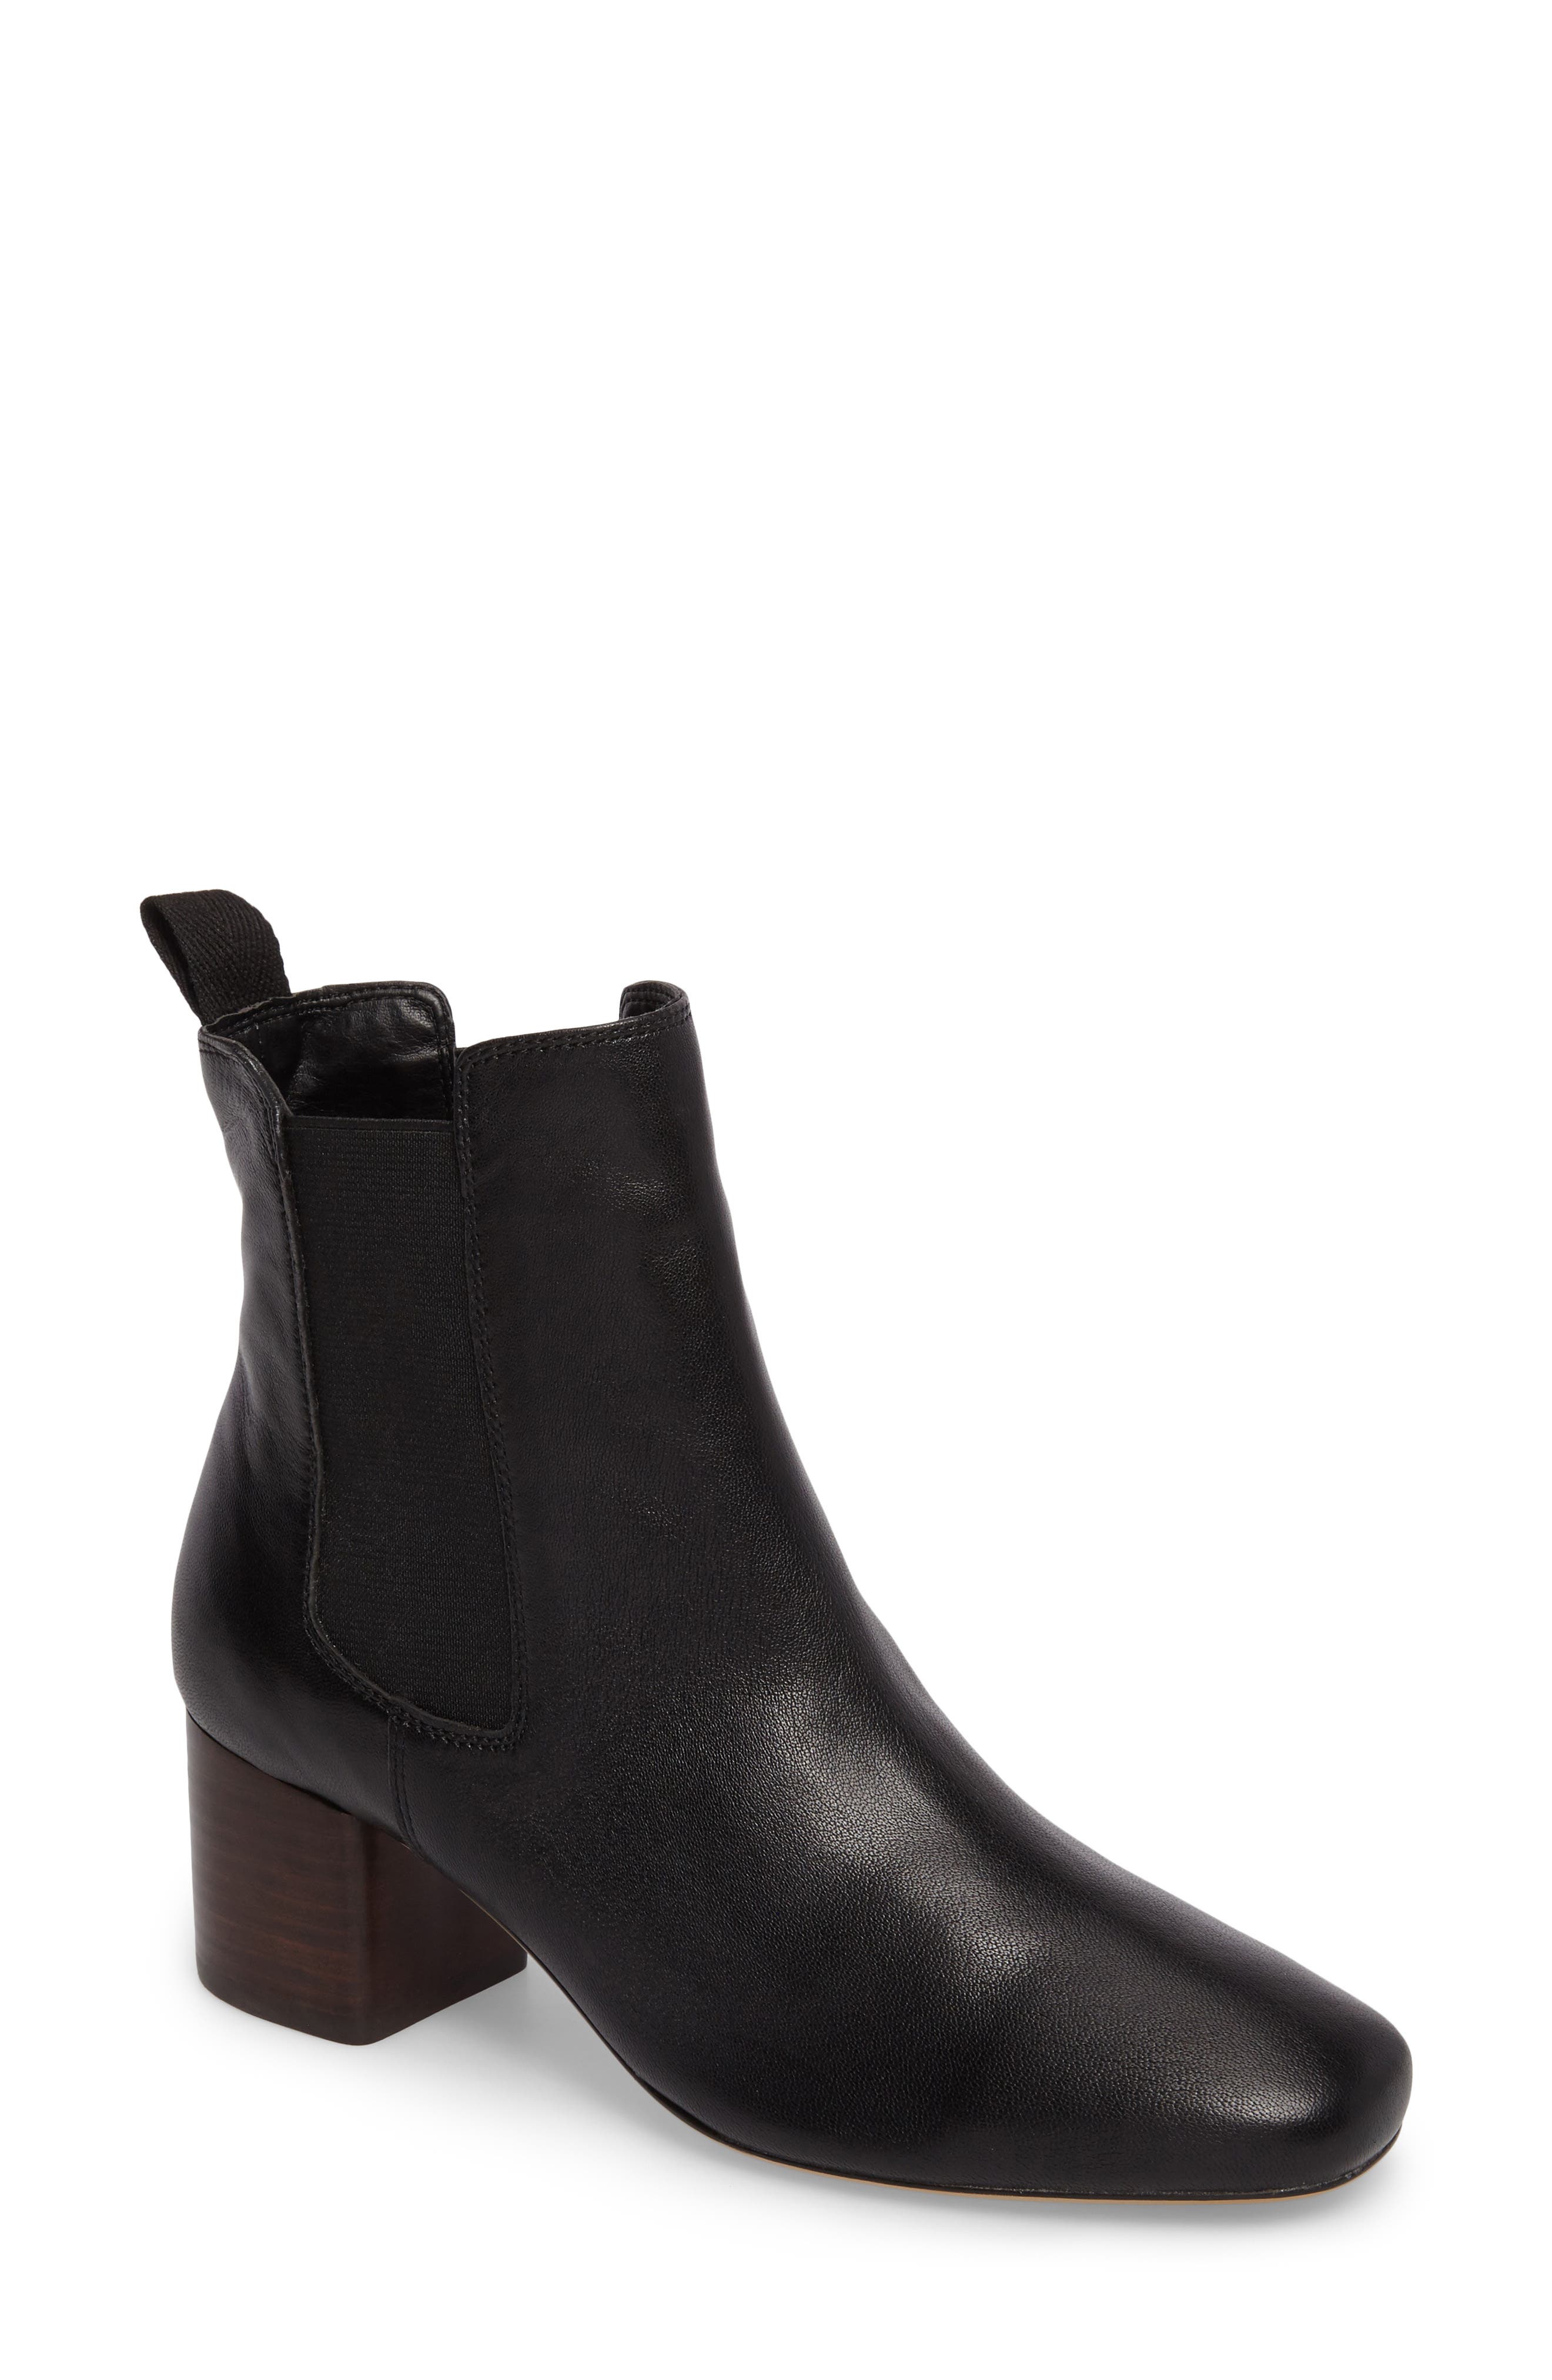 Tony Bianco Alby Chelsea Bootie In Black Nappa Leather | ModeSens